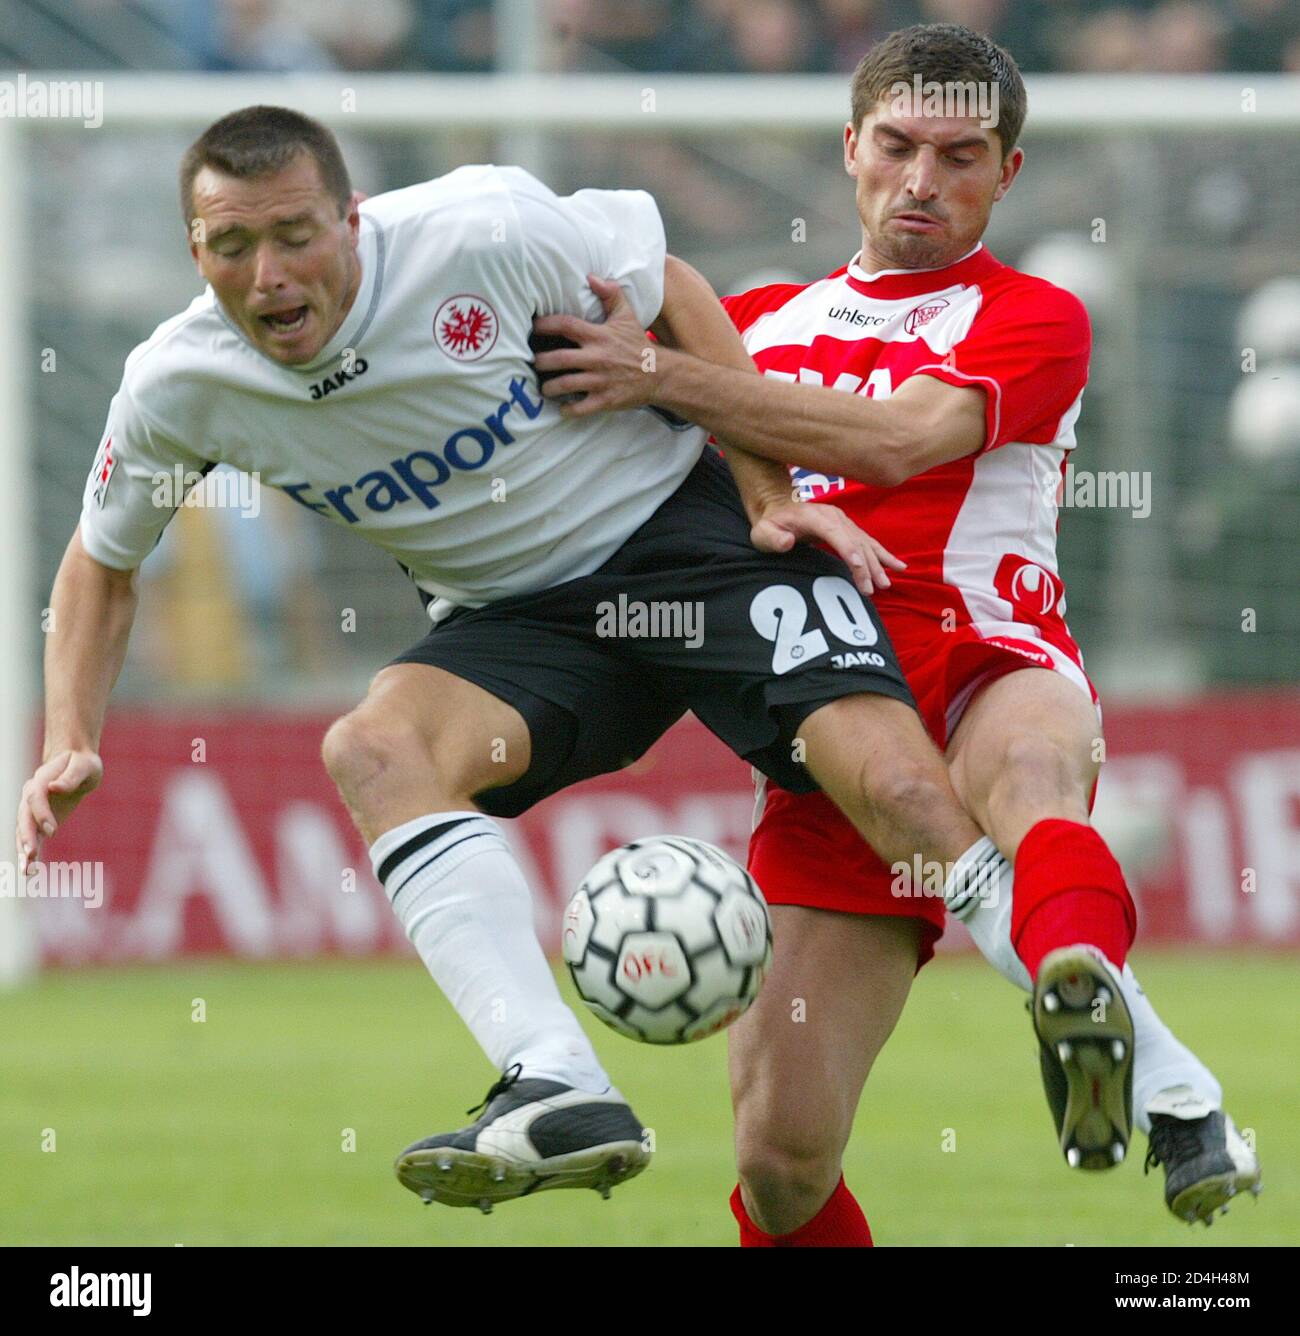 BARLETTA OF KICKERS OFFENBACH TACKLES BEIERLE OF EINTRACHT FRANKFURT DURING  GERMAN SOCCER CUP MATCH IN OFFENBACH Stock Photo - Alamy